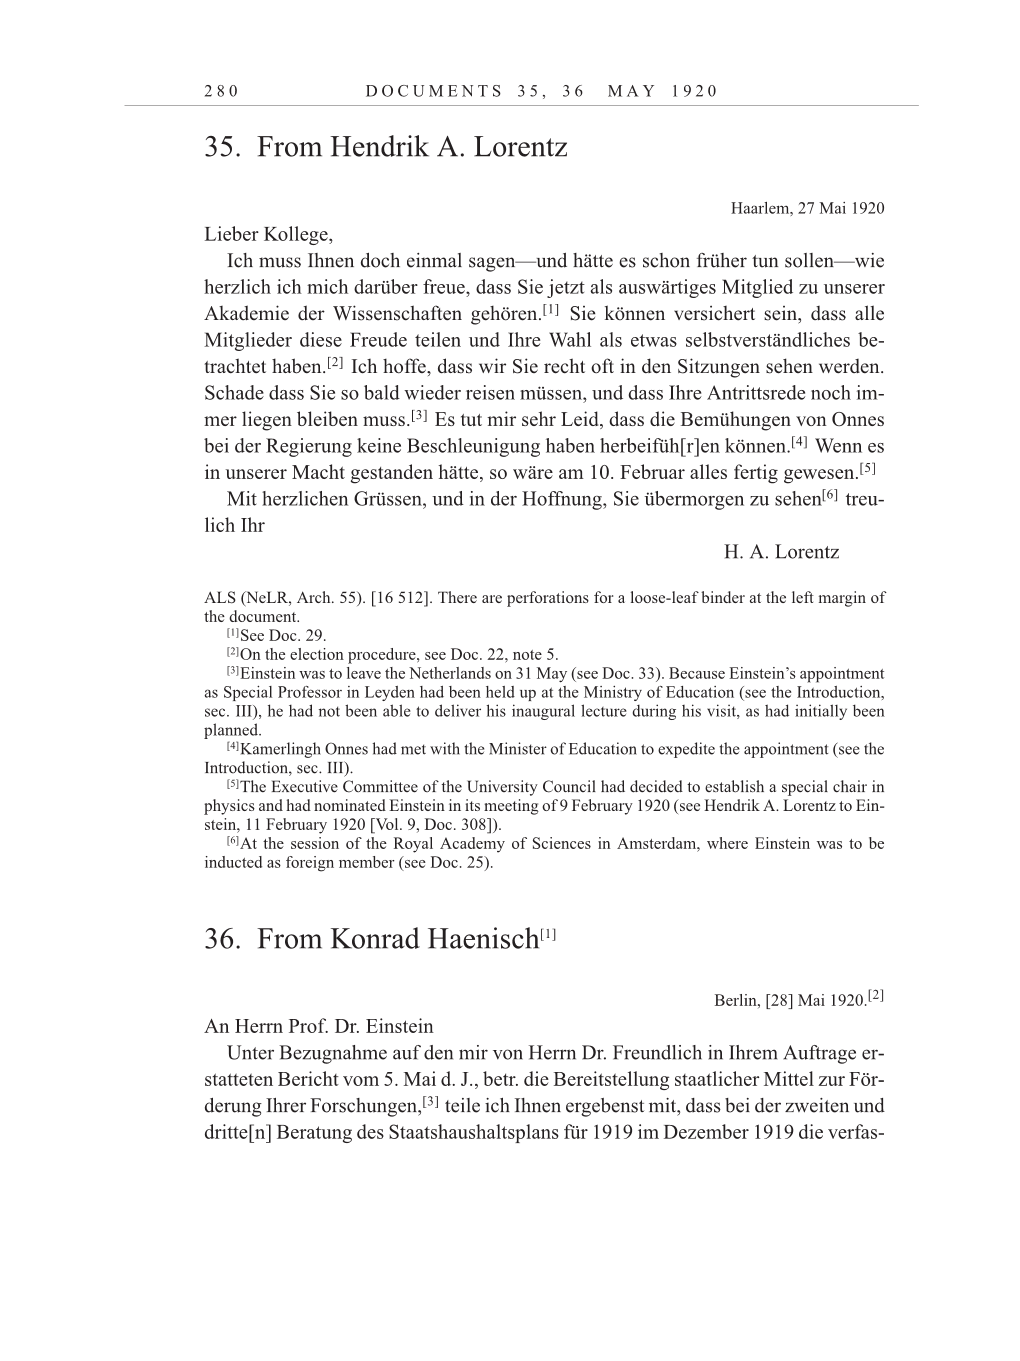 Volume 10: The Berlin Years: Correspondence May-December 1920 / Supplementary Correspondence 1909-1920 page 280